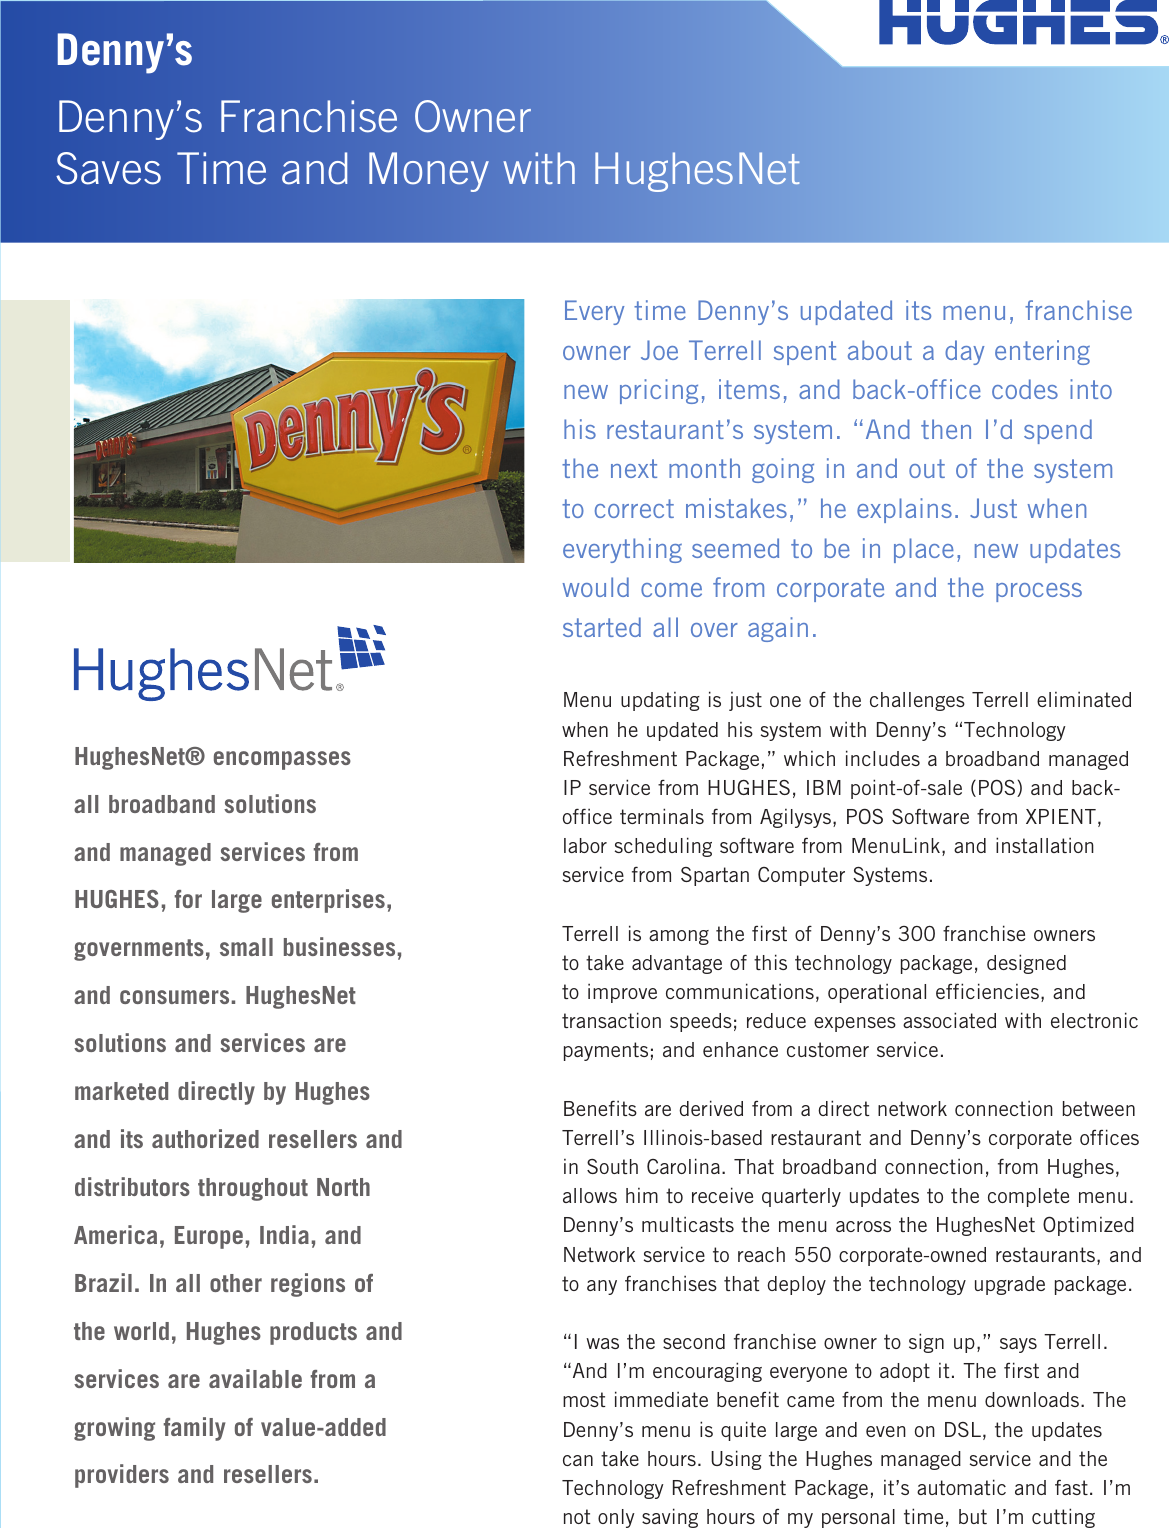 Page 1 of 4 - Dennys HR